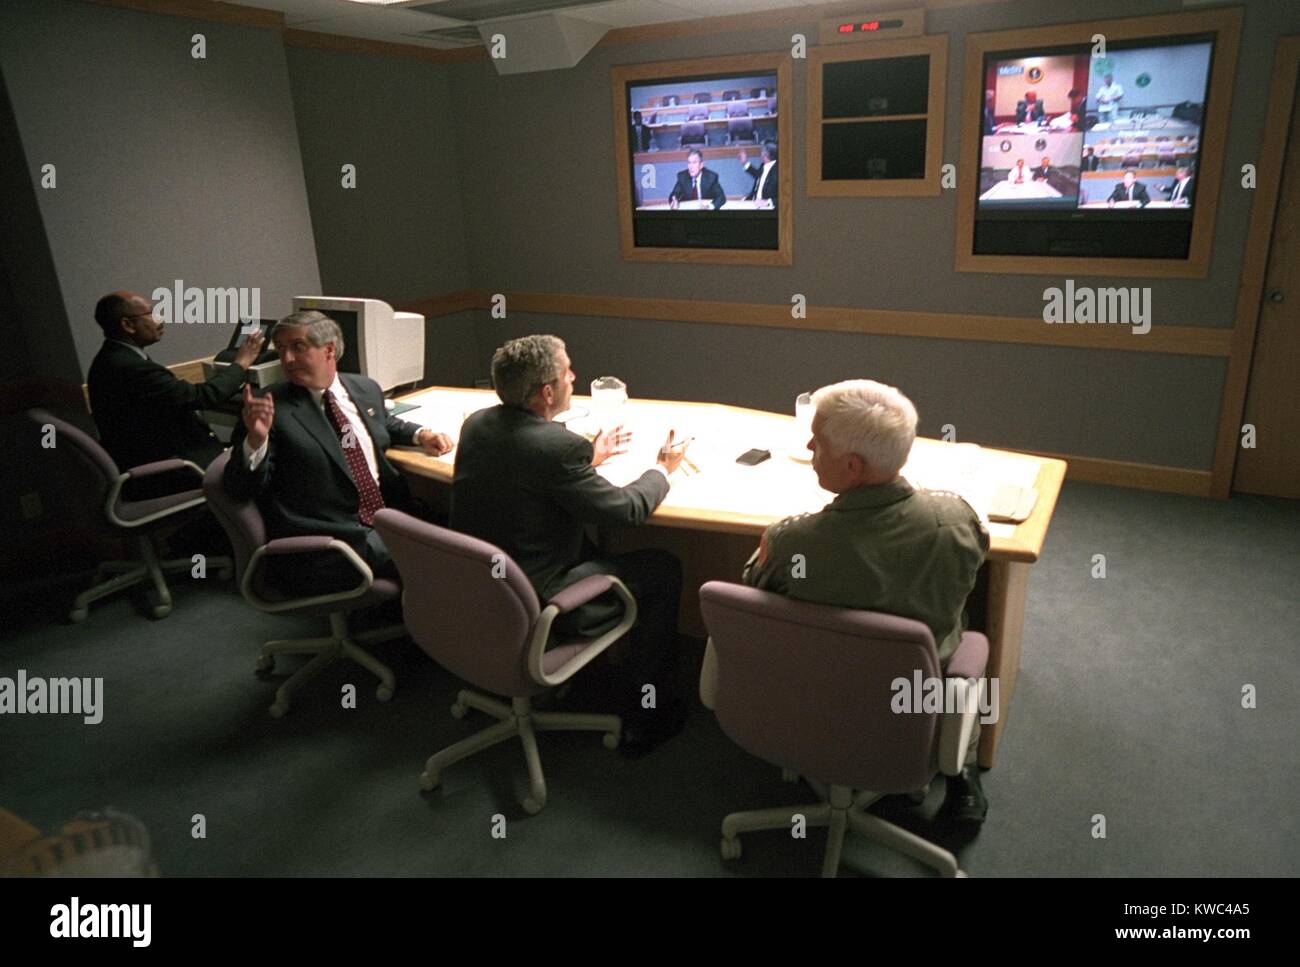 President George W. Bush in a multiscreen video conference at Offutt Air Force Base, Sept. 11, 2001. He met with the National Security Council in a teleconference via the U.S. STRATCOM bunker. He arrived from Sarasota at 2:50 PM and left for Washington, D.C. at 4:26 PM. Sitting next to Bush are White House Chief of Staff Andy Card (left) and Adm. Richard Mies. (BSLOC 2015 2 134) Stock Photo